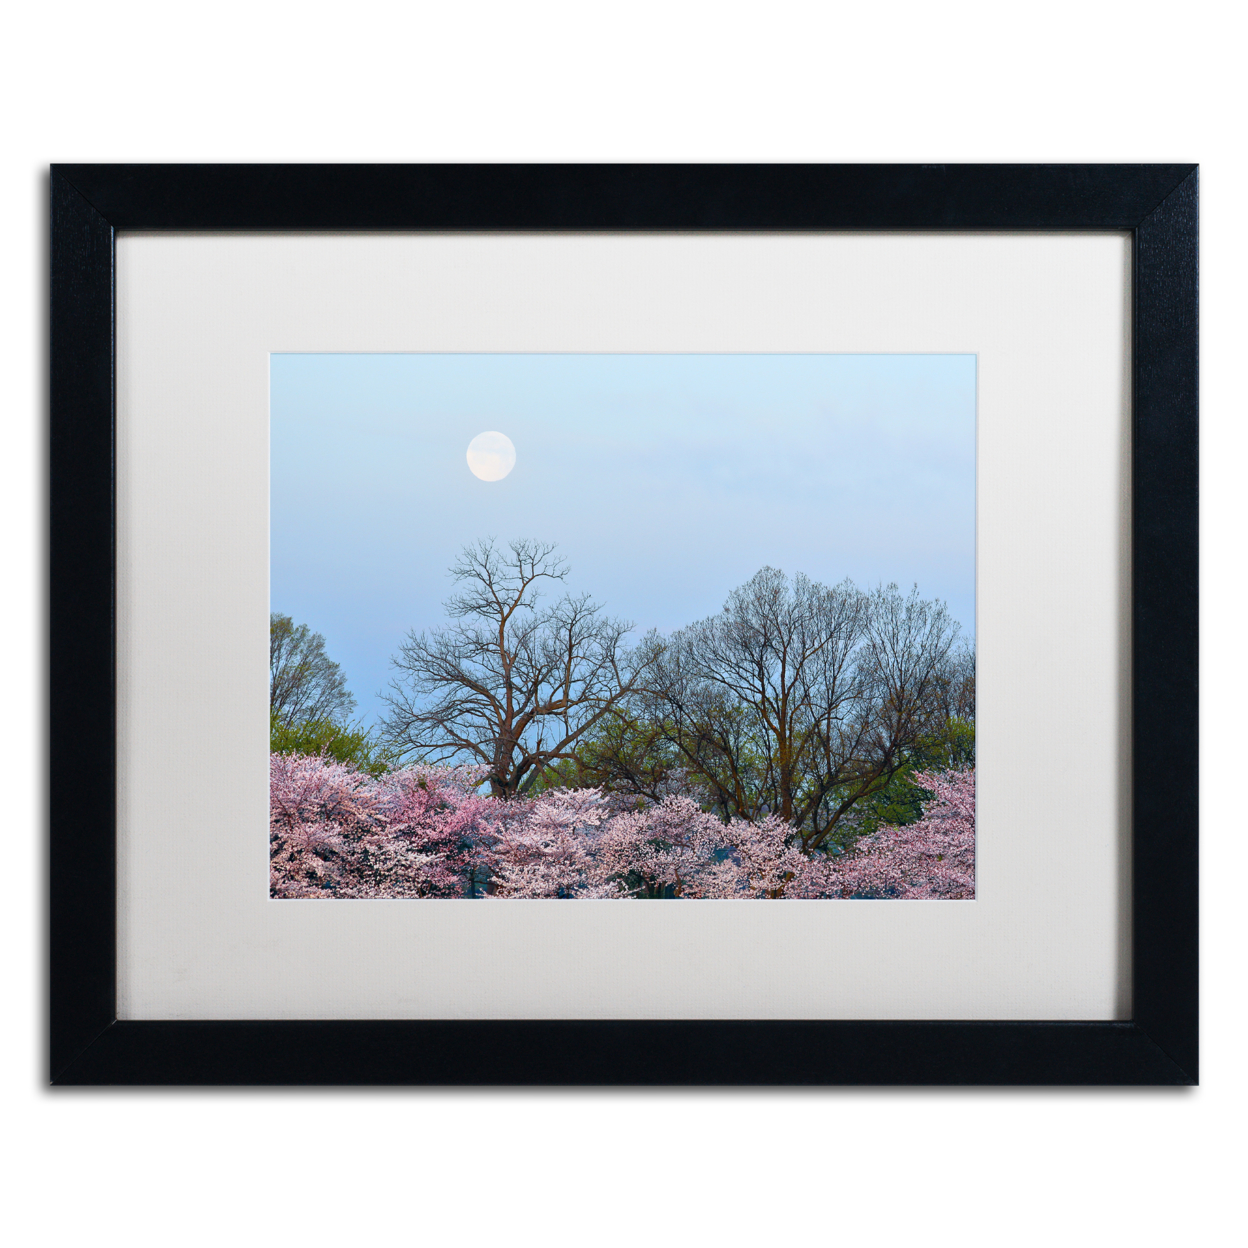 CATeyes 'Spring Moon 2' Black Wooden Framed Art 18 X 22 Inches